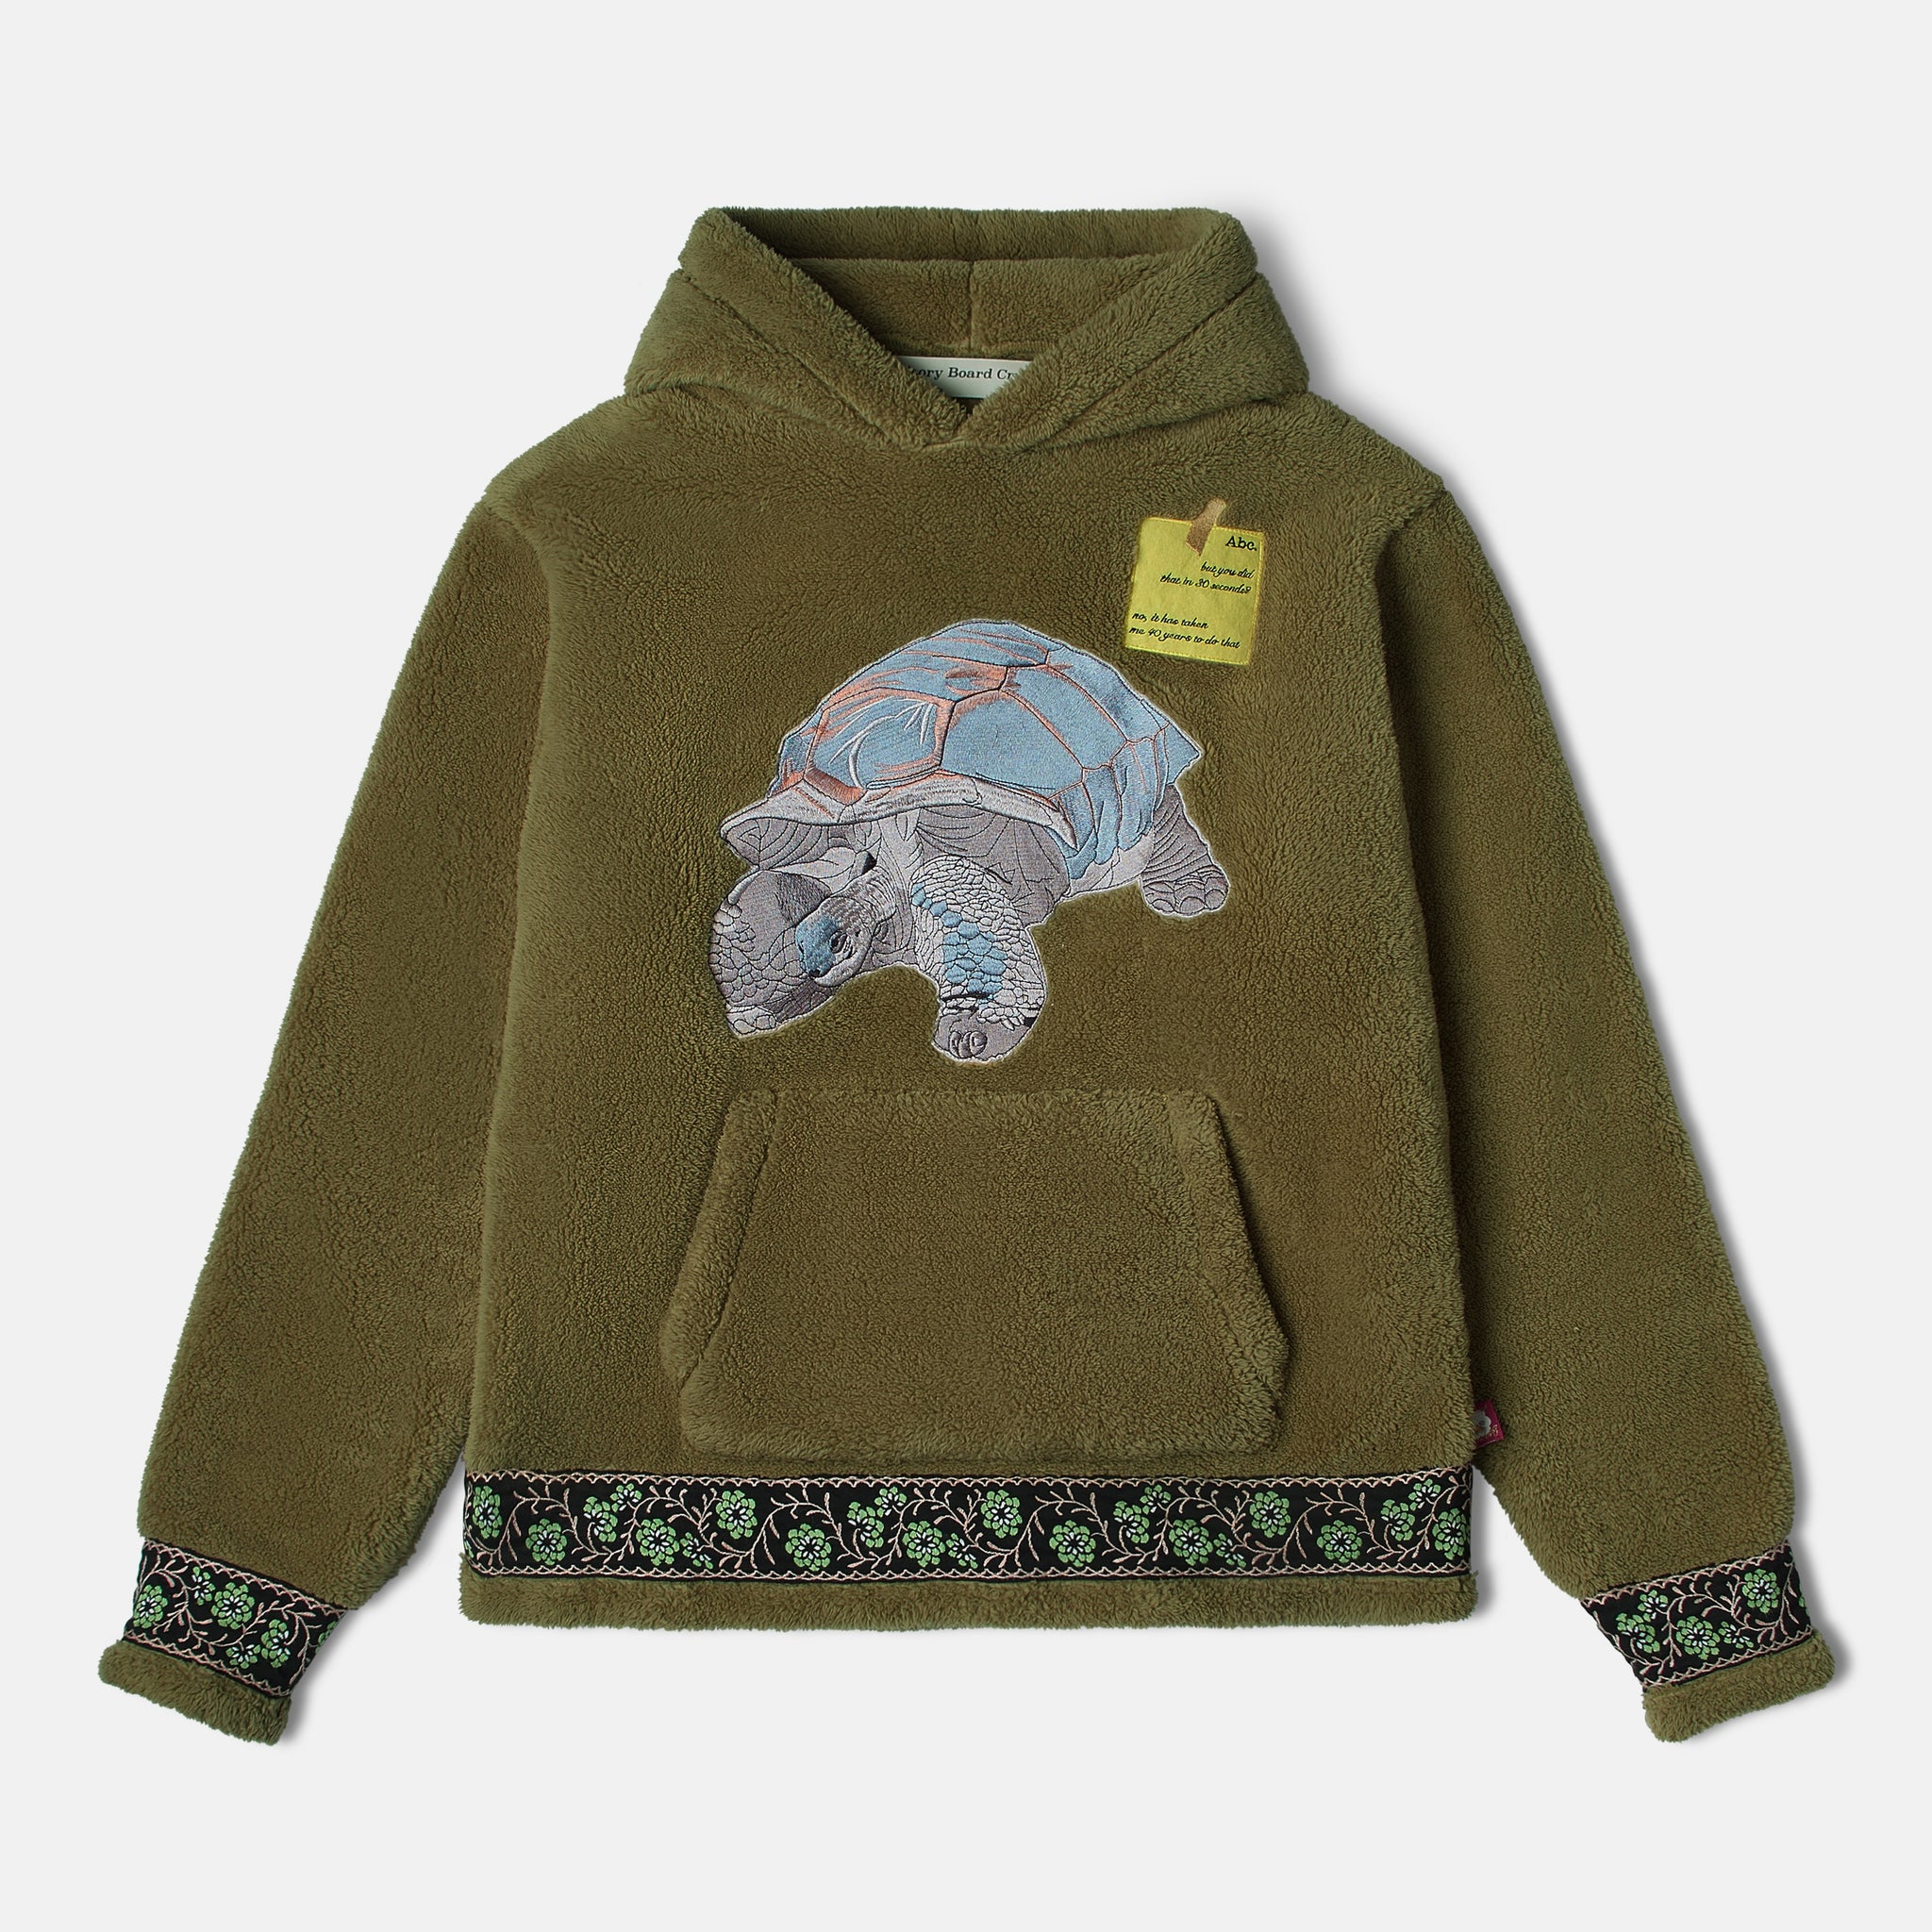 Abc. "In the End" Boa Fleece Pullover Hoodie (Green)